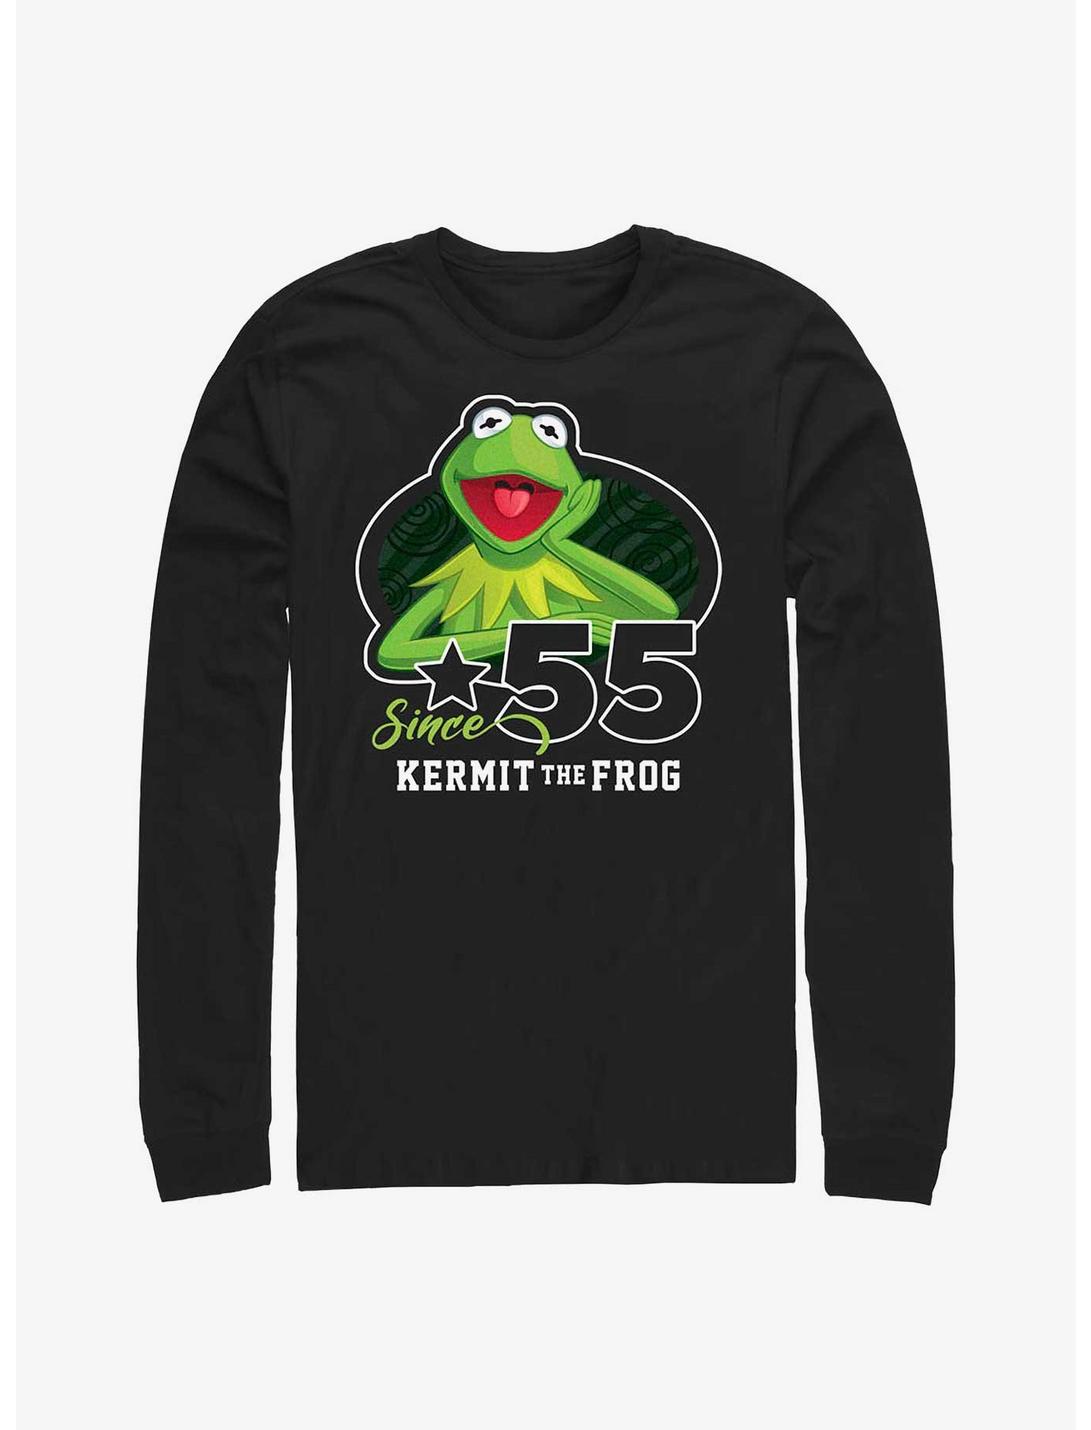 Disney The Muppets Kermit The Frog Since '55 Long-Sleeve T-Shirt, BLACK, hi-res